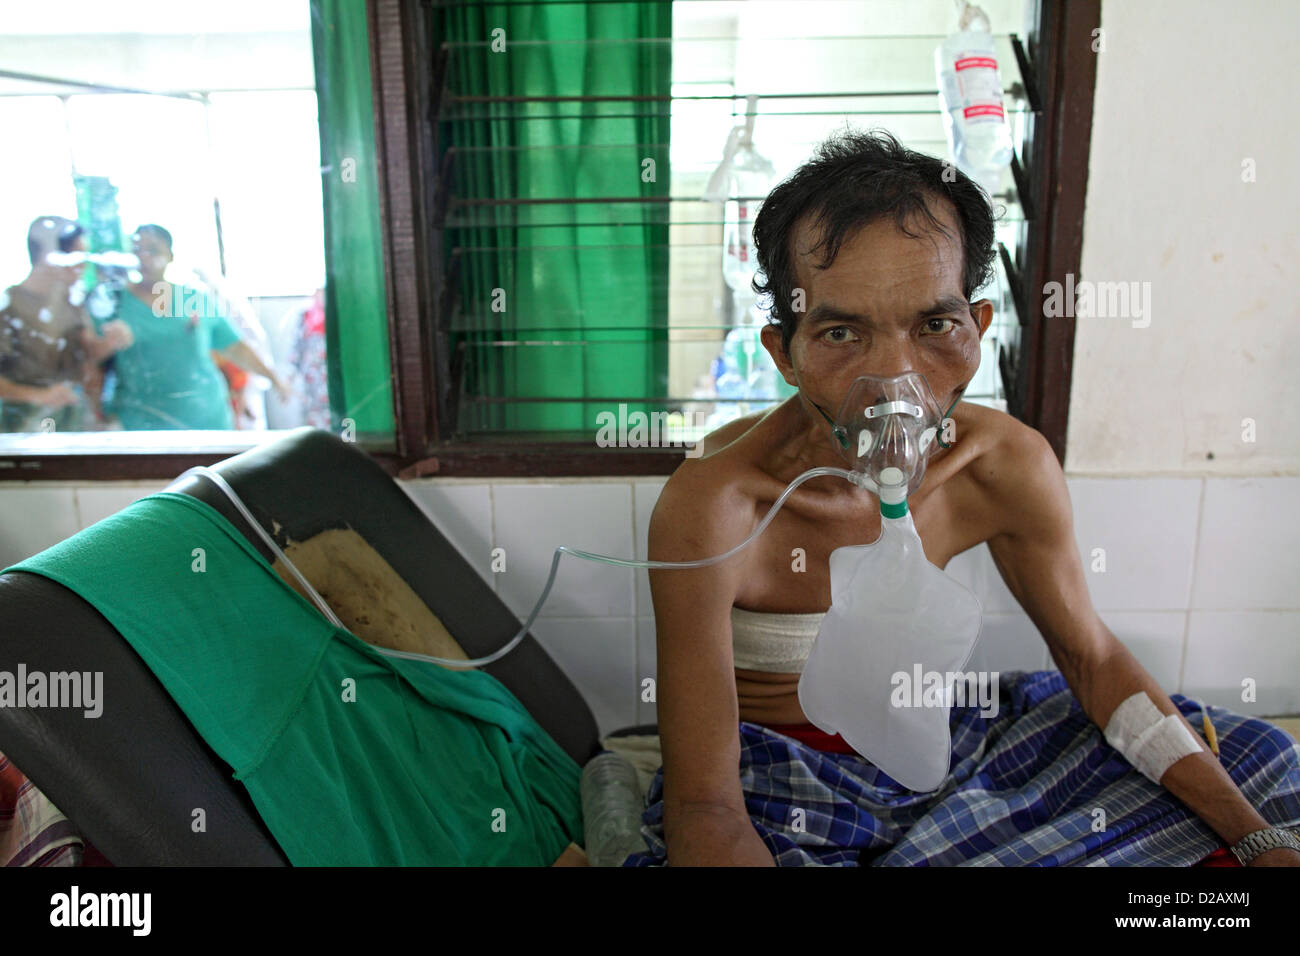 Pariaman, Indonesia, the earthquake injured man in the General Hospital Stock Photo